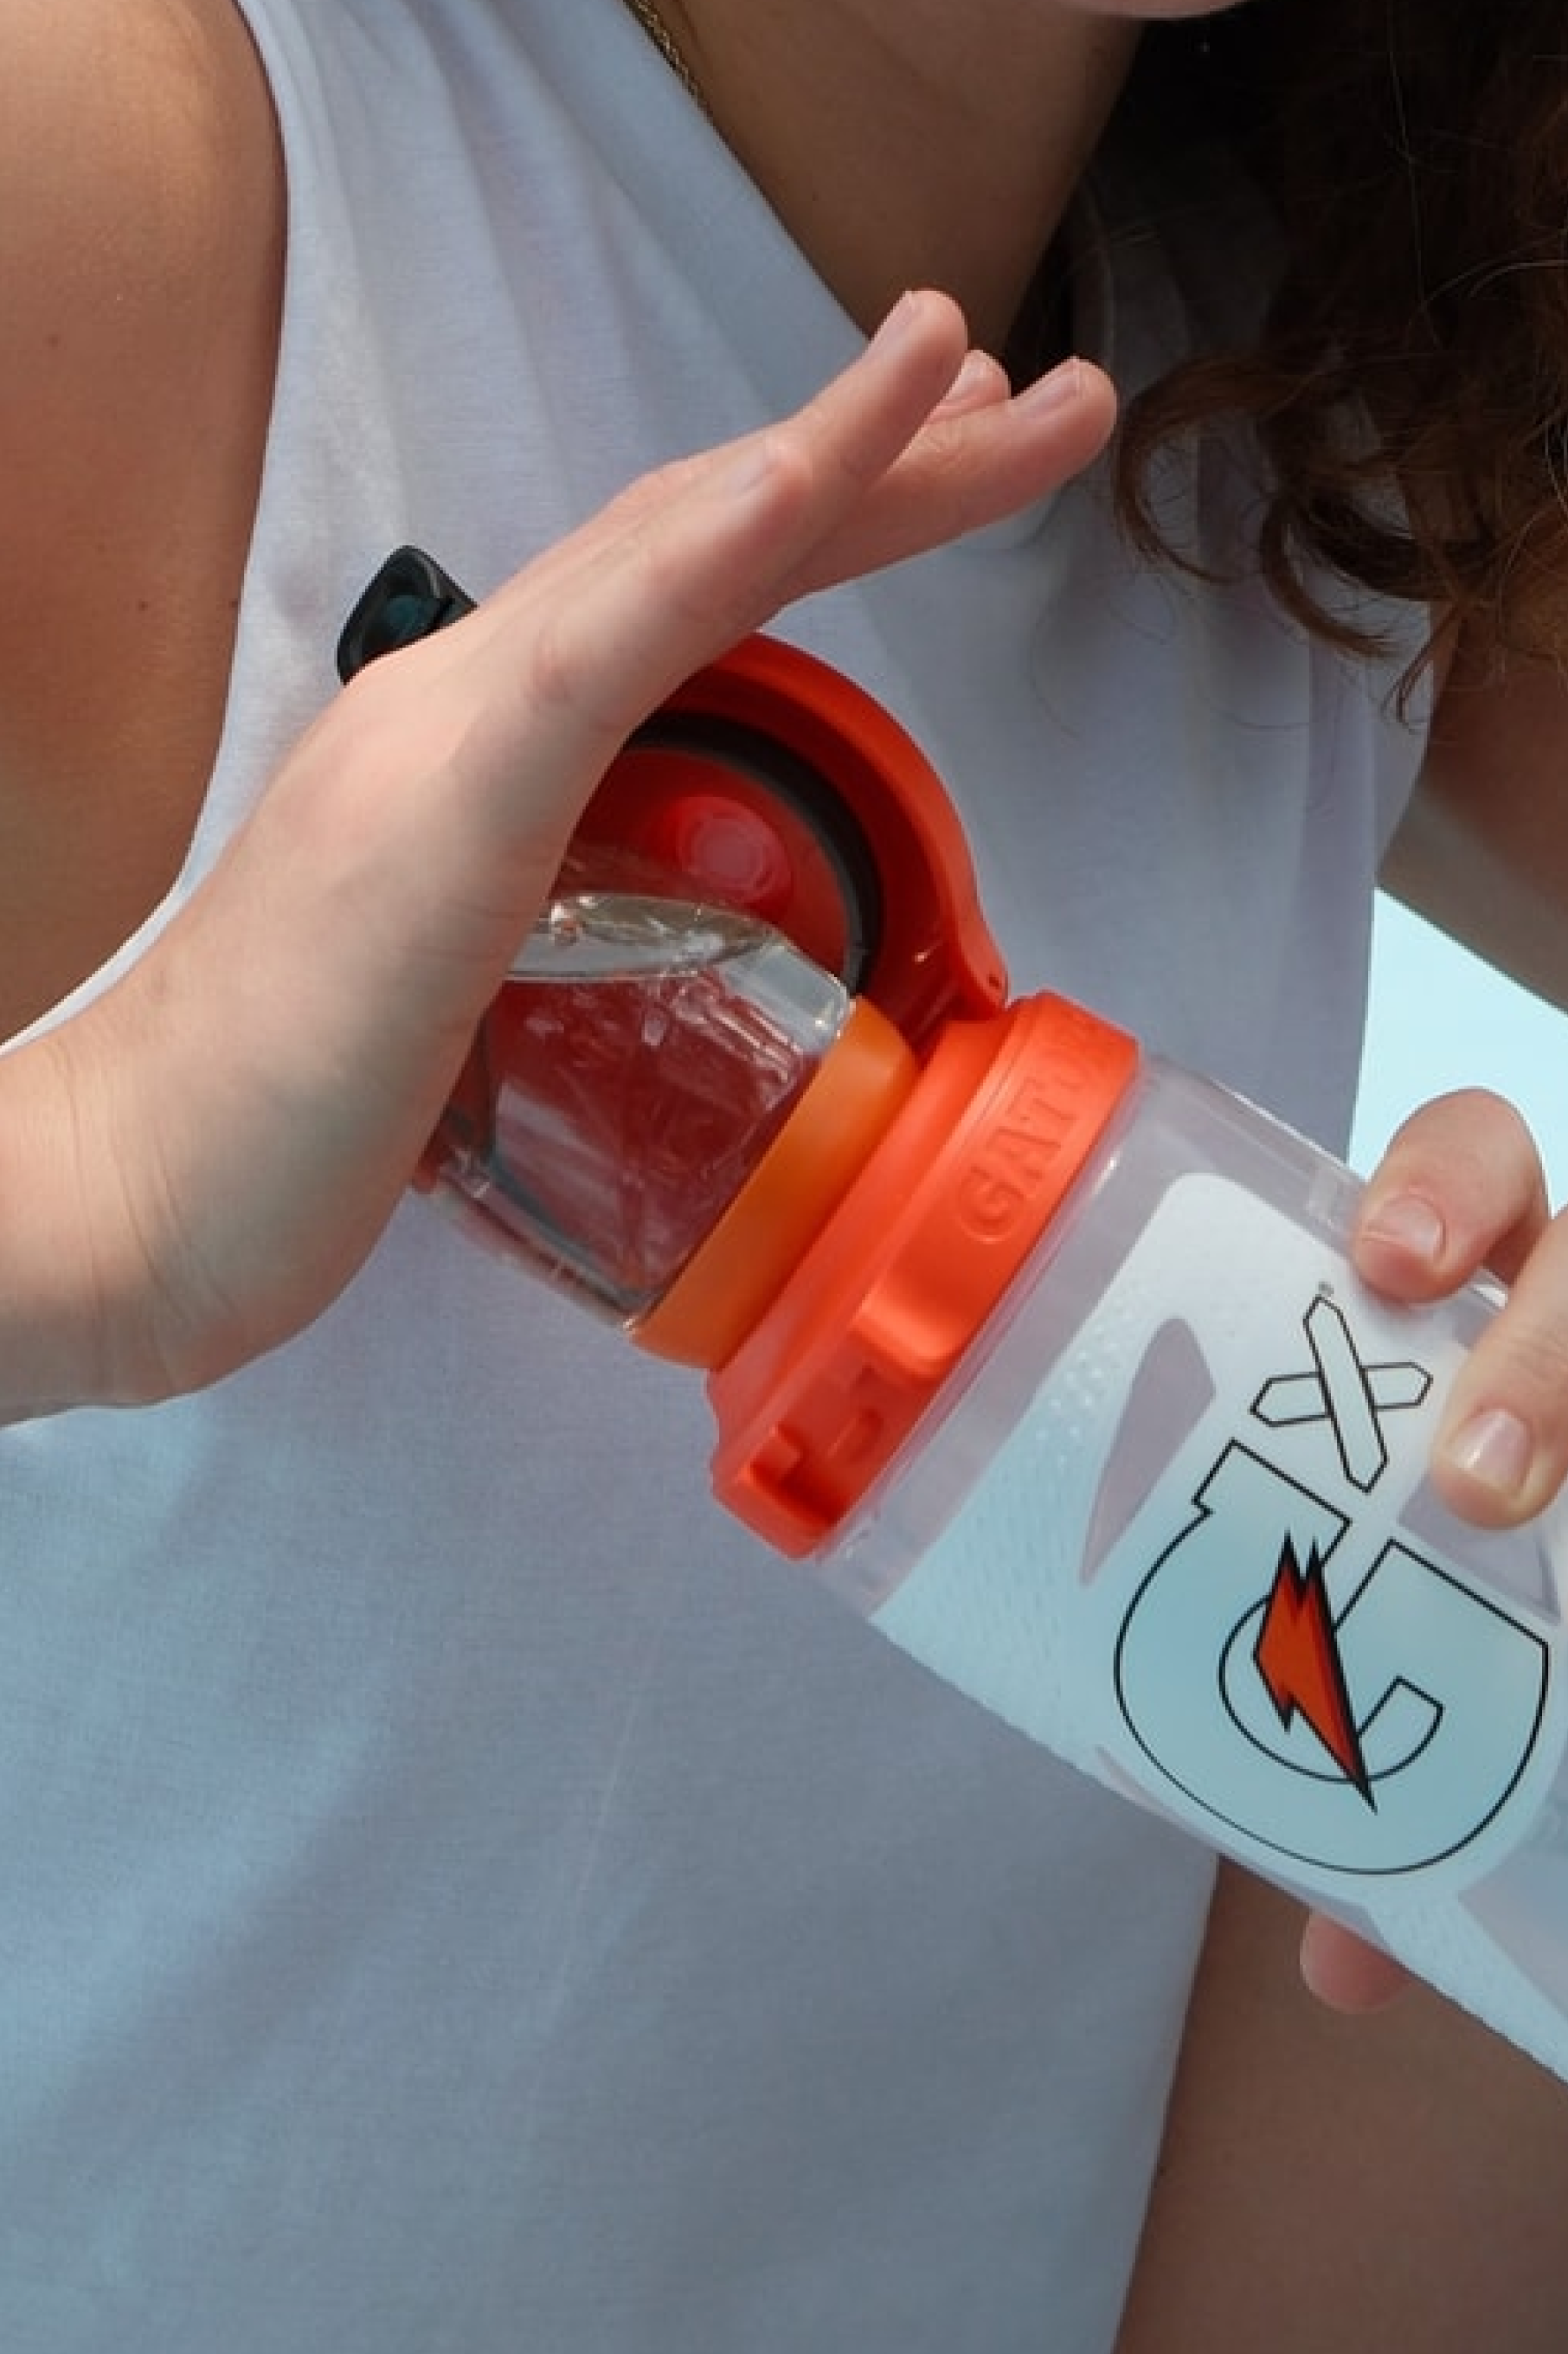 Athlete piercing a Gx Pod with the top of an open Gatorade Bottle